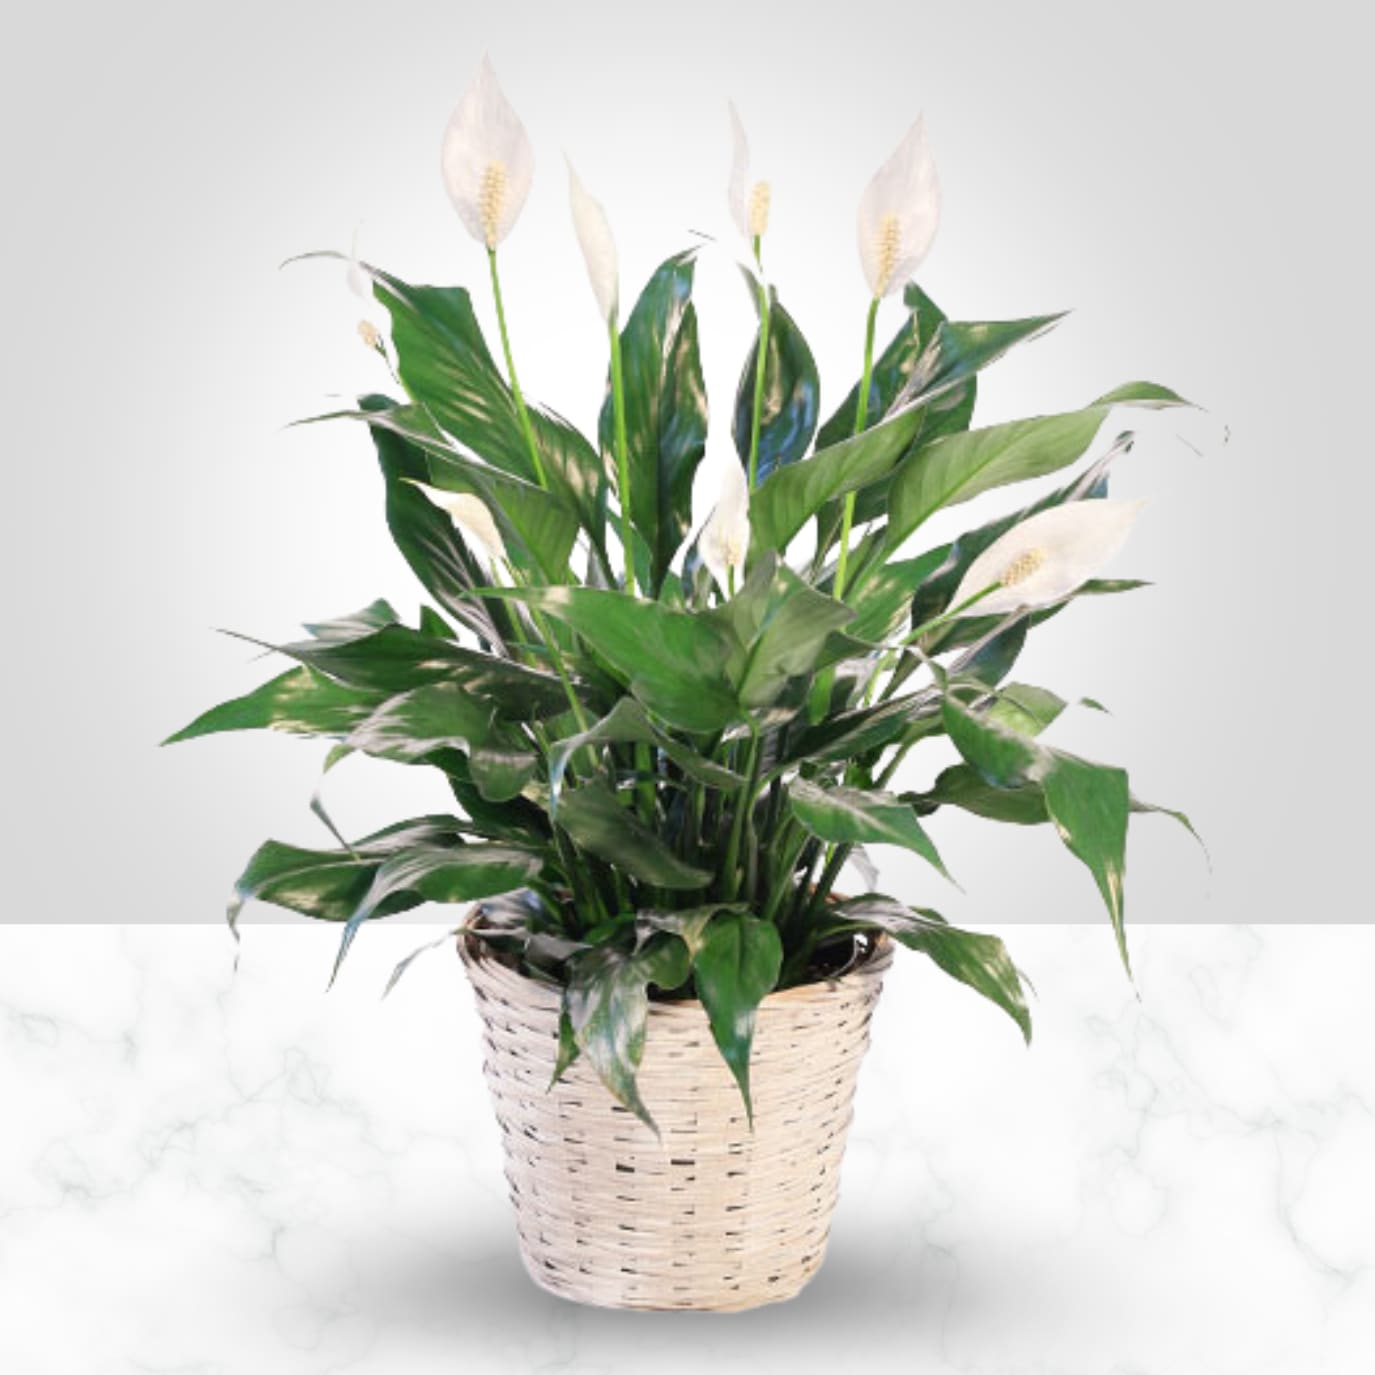 Peace Lily - This peaceful plant brings serenity and joy to any space. Also appropriate for funeral service or the home. Available in 3 different sizes and great for any occasion. Basket color will vary.